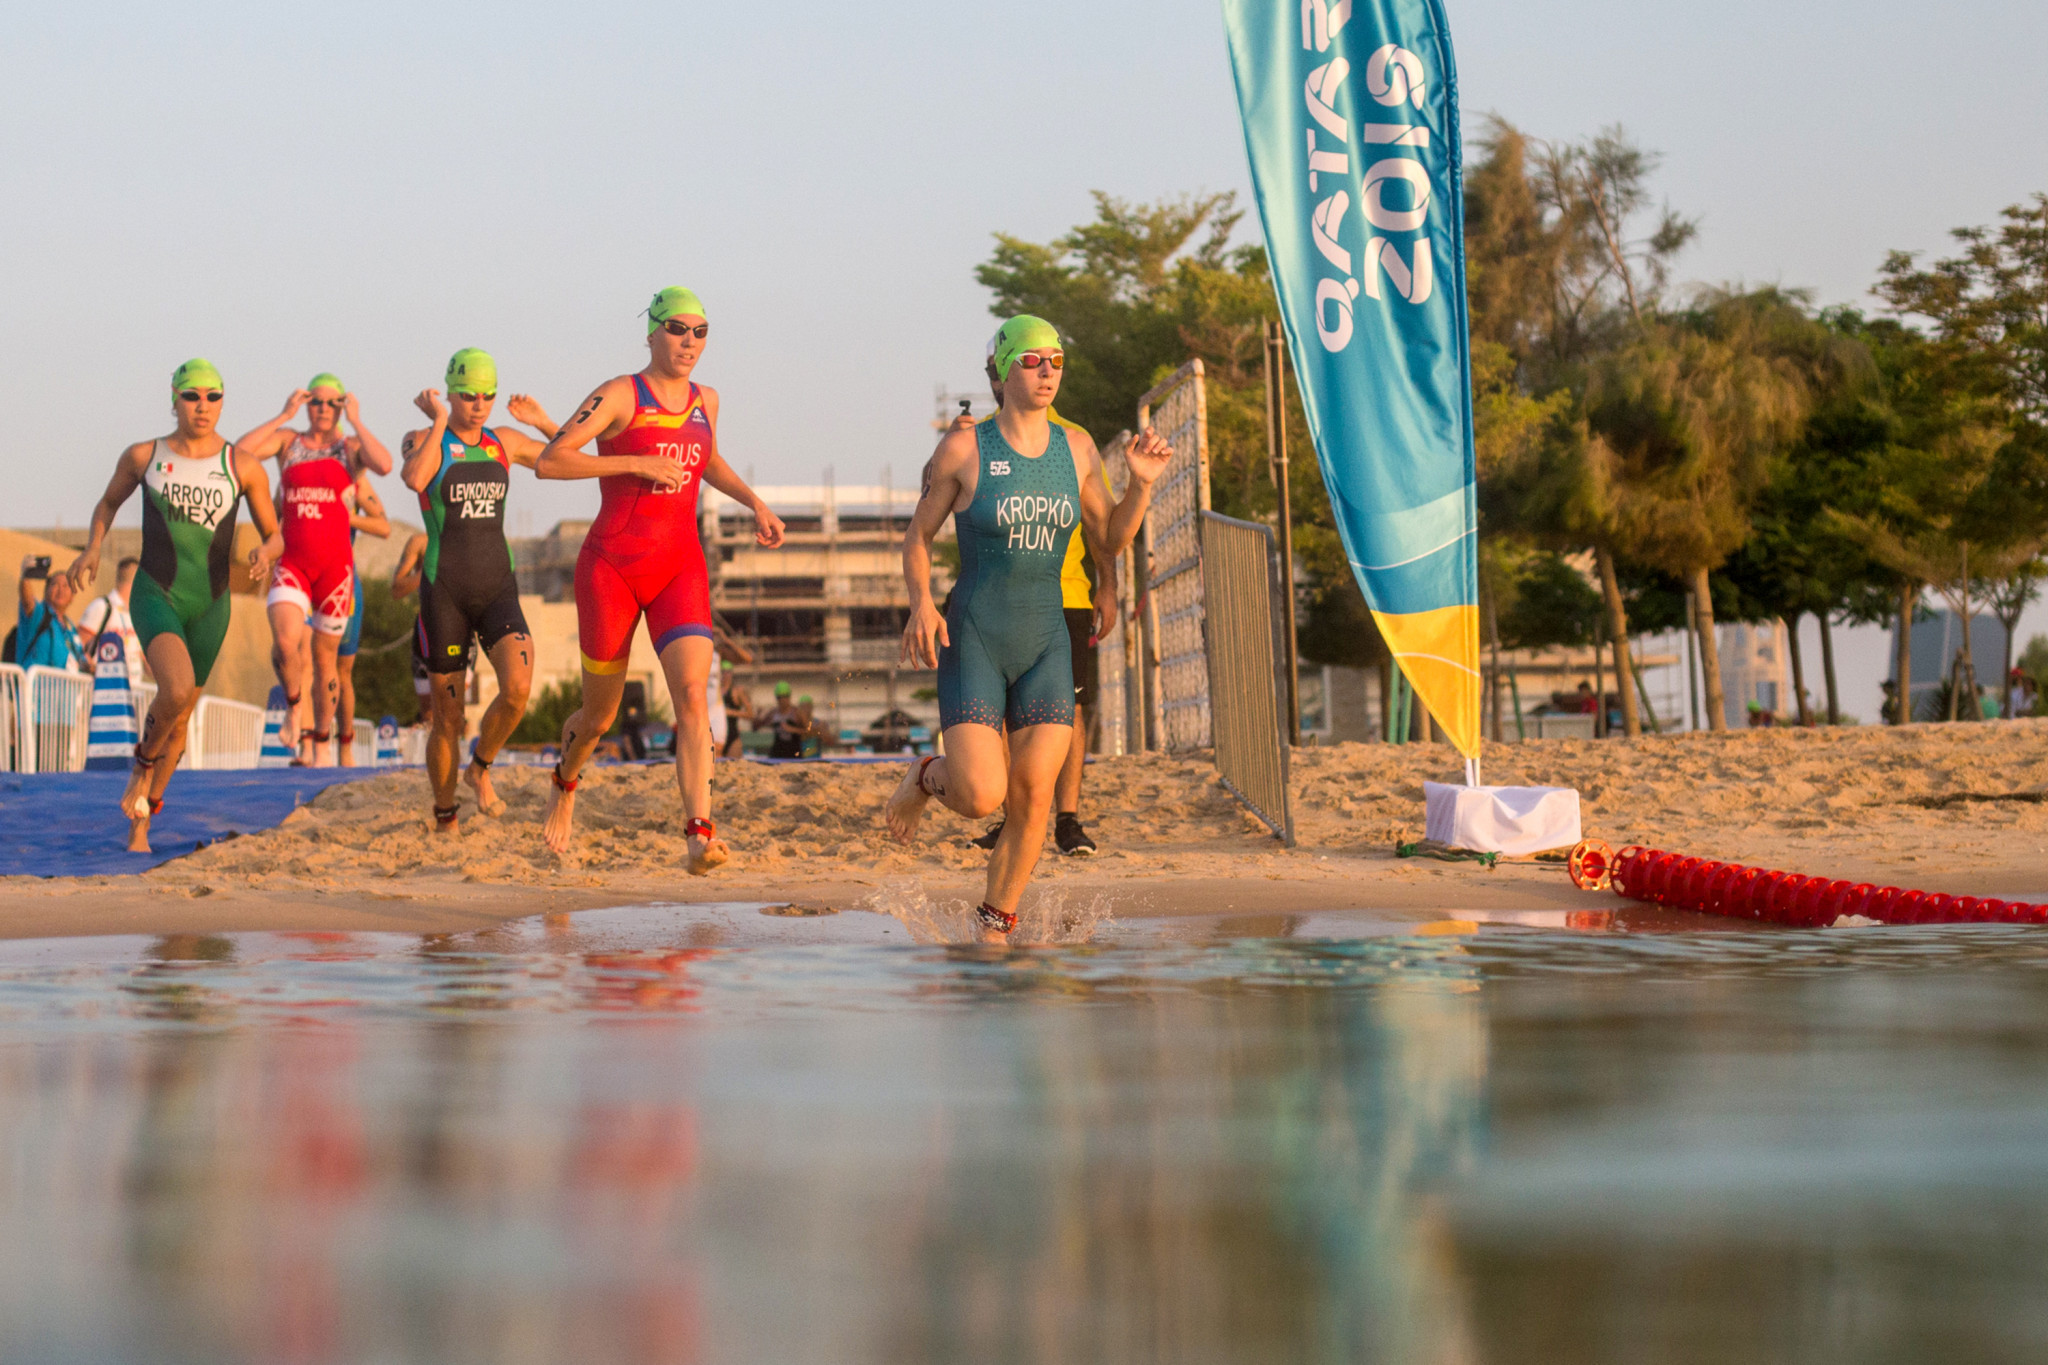 The leaders start the pace in the early stages of the aquathlon mixed team relay ©ANOC World Beach Games